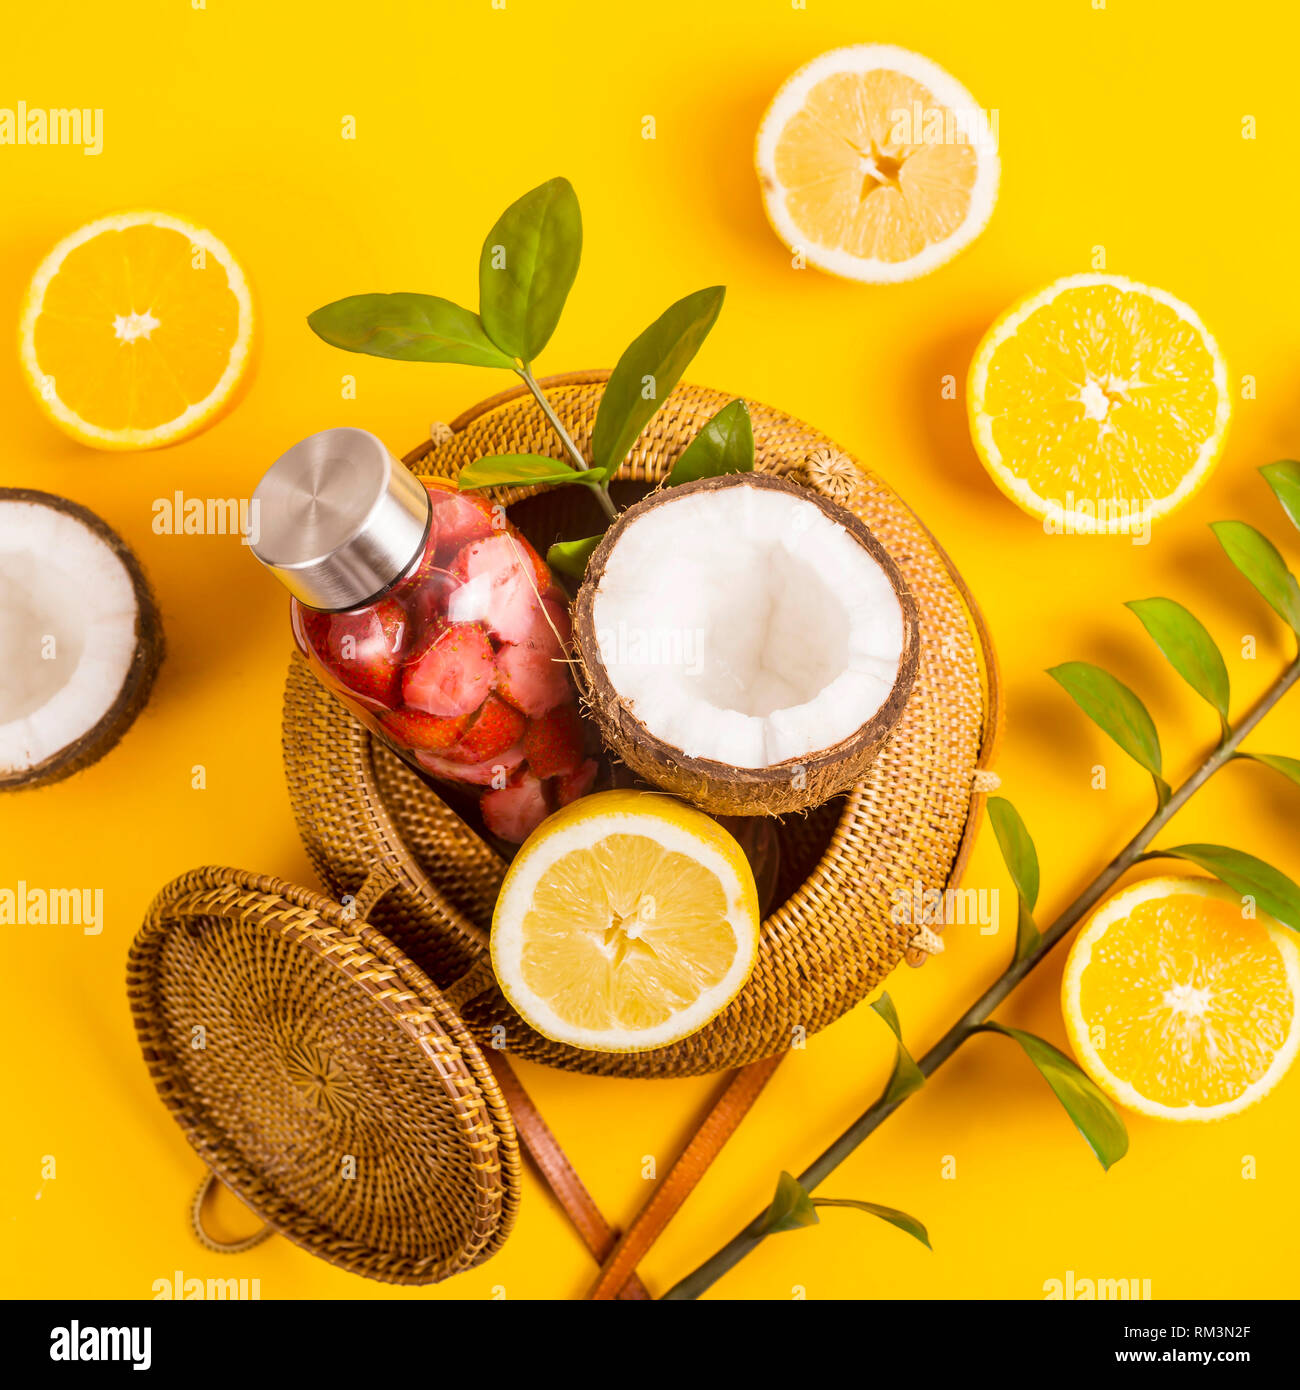 https://c8.alamy.com/comp/RM3N2F/water-with-strawberries-oranges-lemons-and-coconuts-on-yellow-with-a-straw-bag-RM3N2F.jpg